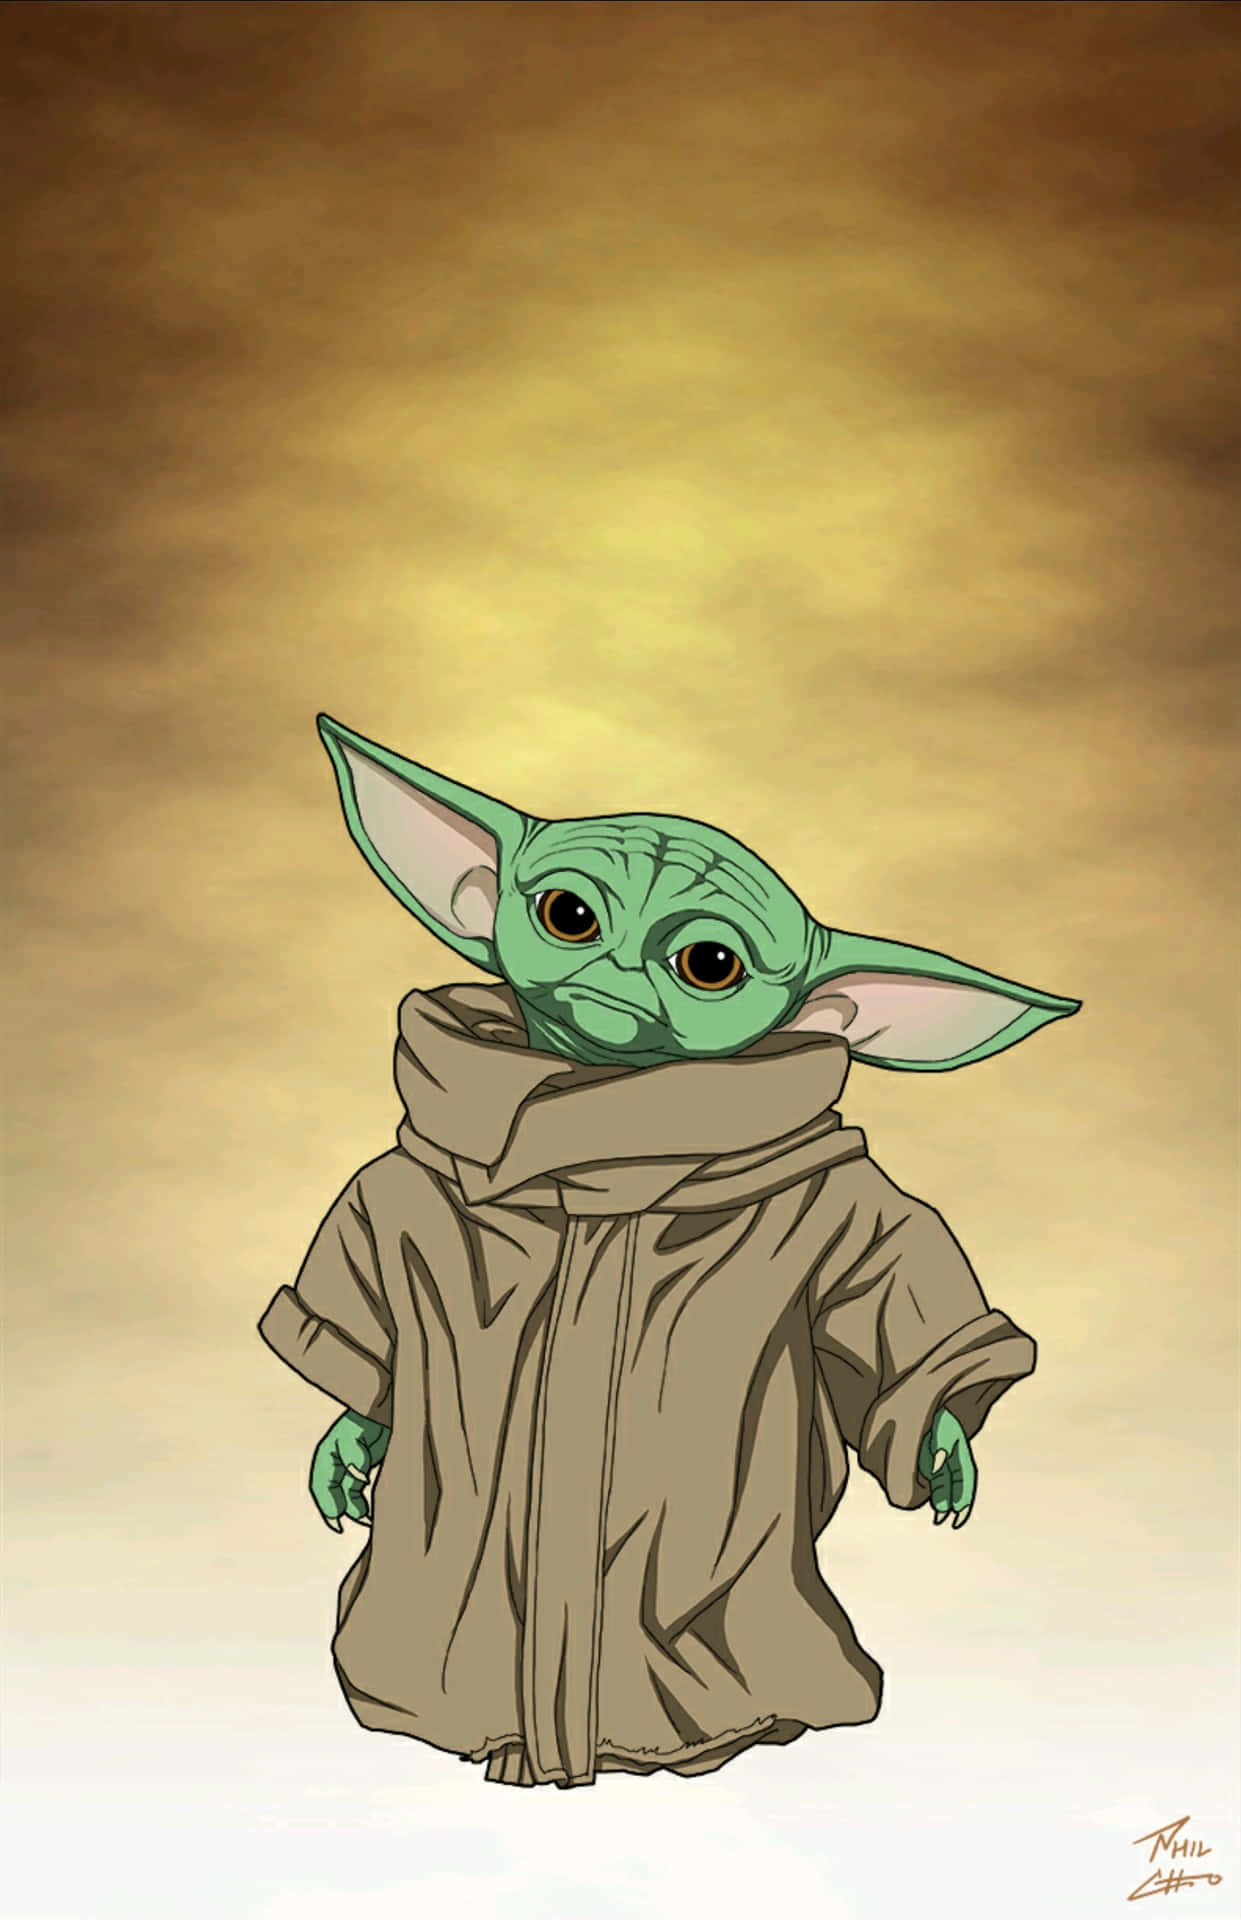 Premium Photo  A close up of a baby yoda with a hood and large blue eyes.